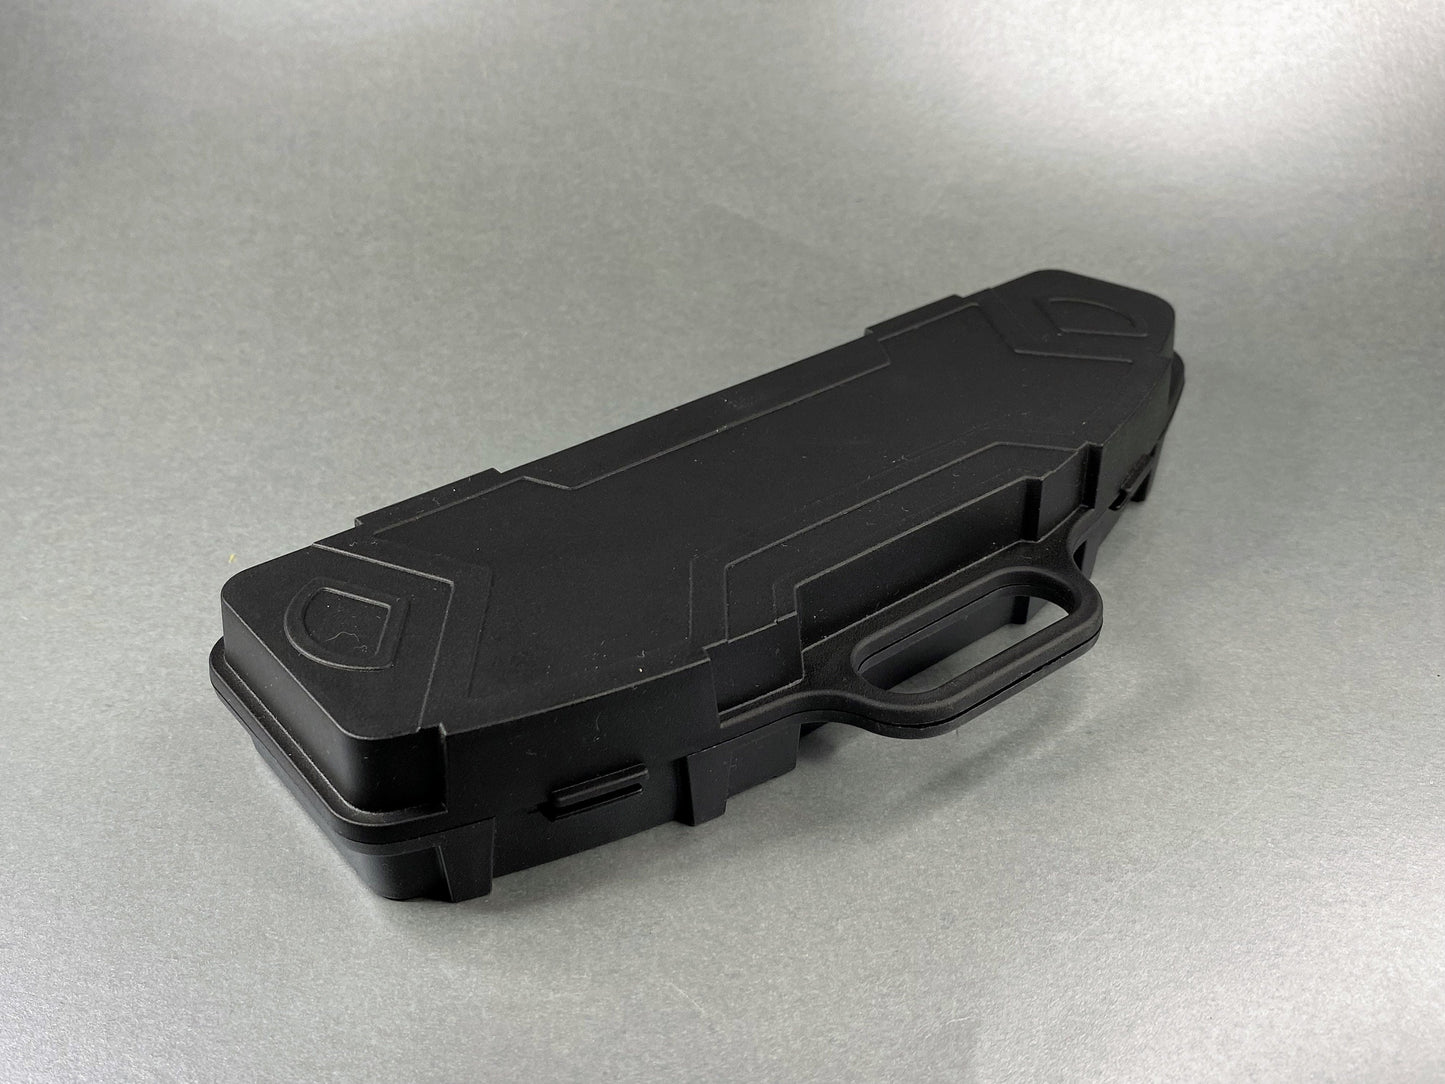 this is the pen sized plastic rifle case in its closed position showing the outside shape simulating the real rifle case but much smaller